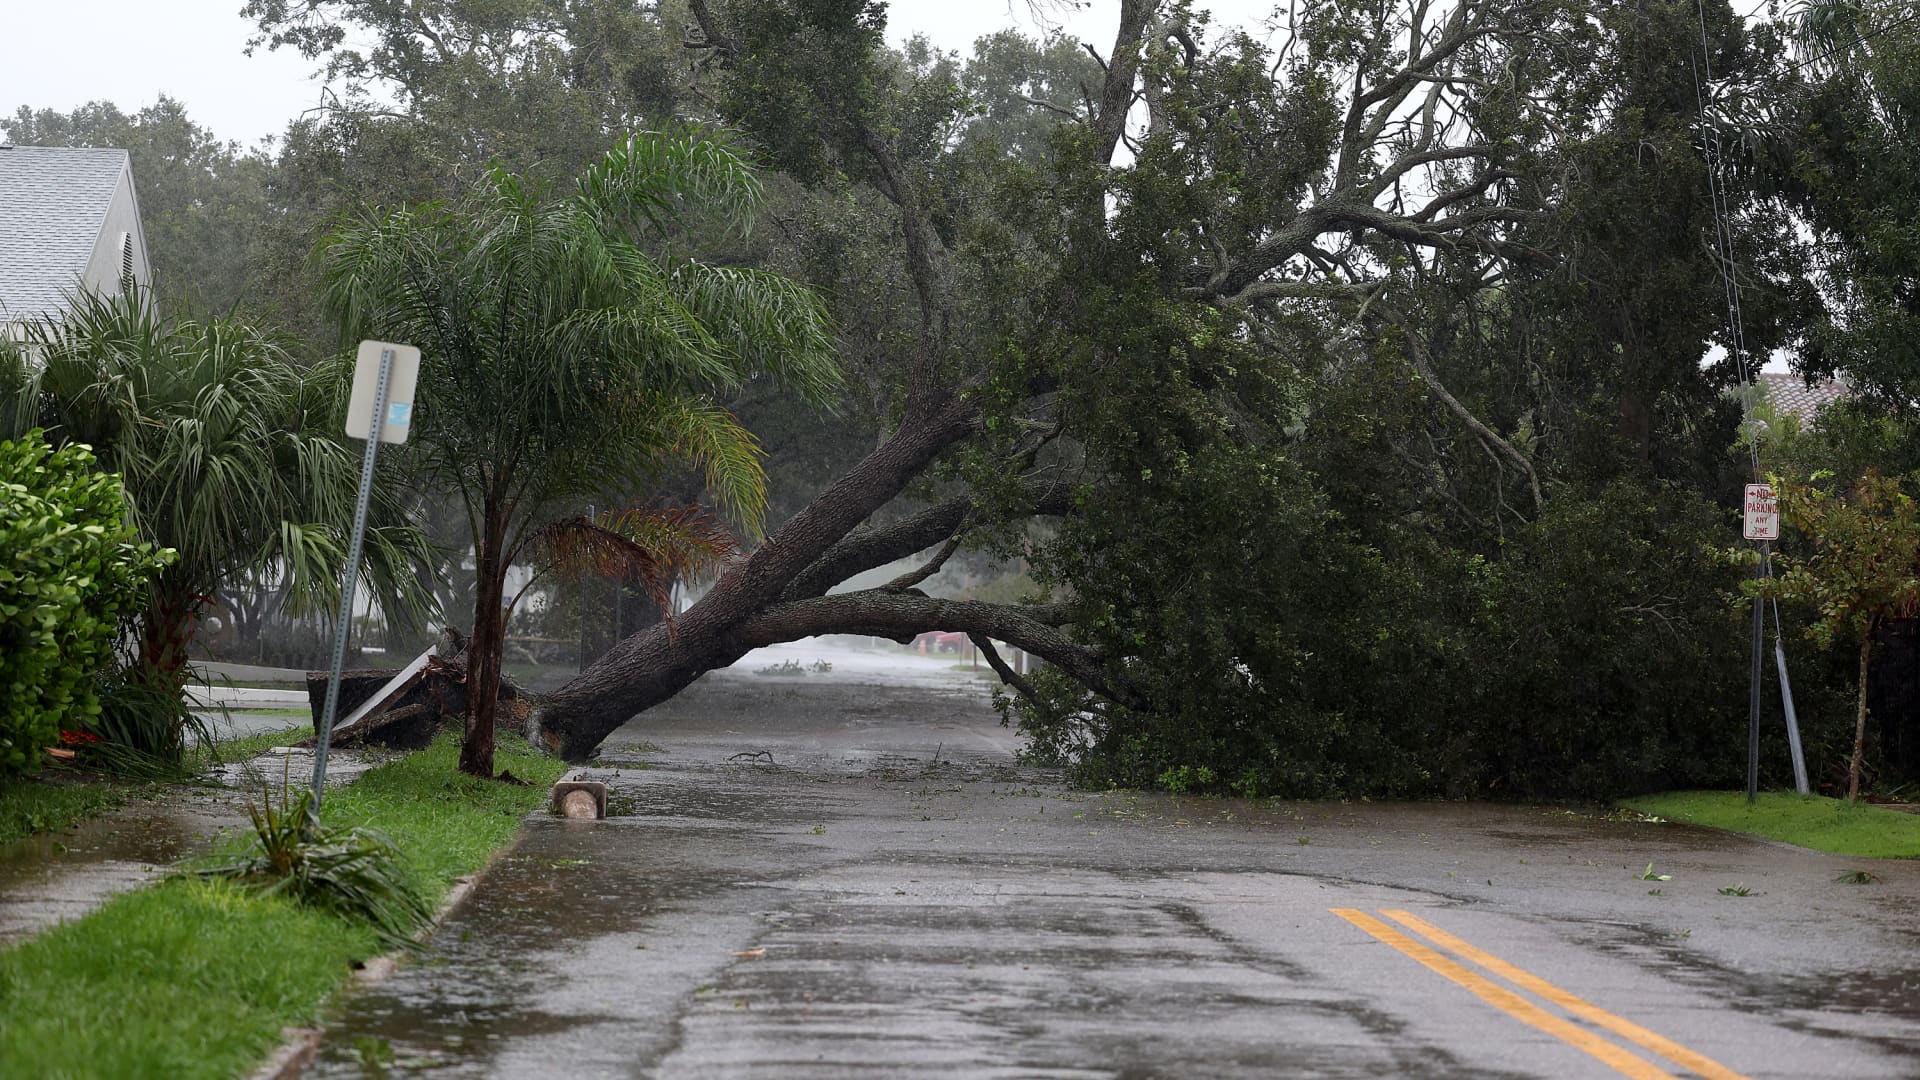 A down tree lays over the road after being toppled by the winds and rain from Hurricane Ian on September 28, 2022 in Sarasota, Florida.